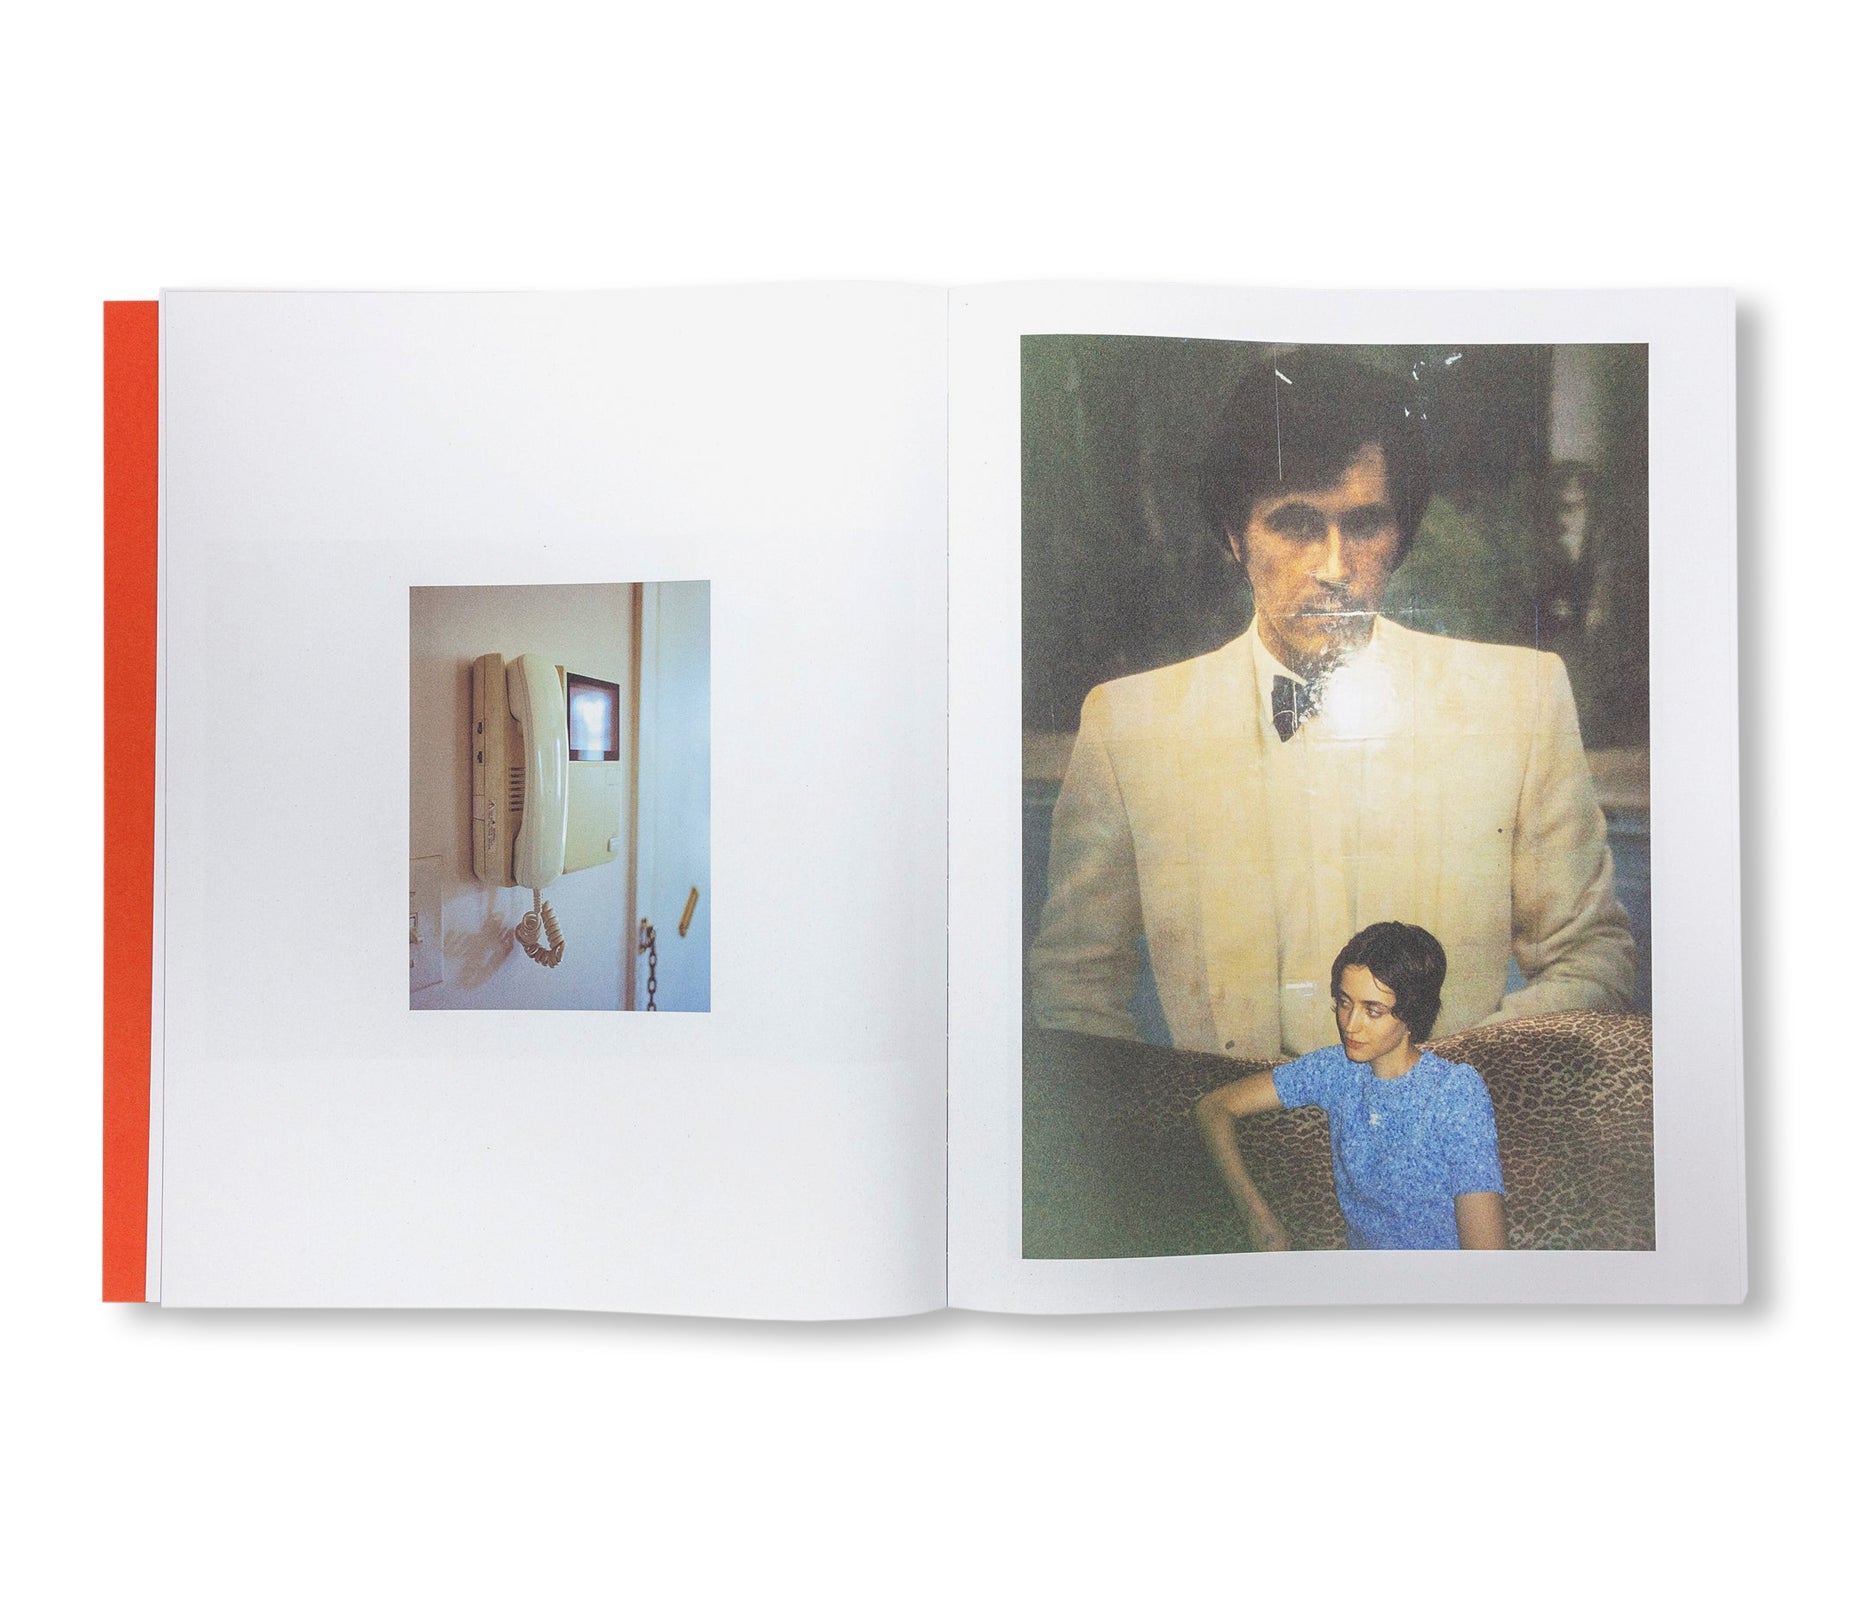 THANK YOU FOR YOUR BUSINESS by Quentin de Briey [SPECIAL EDITION 